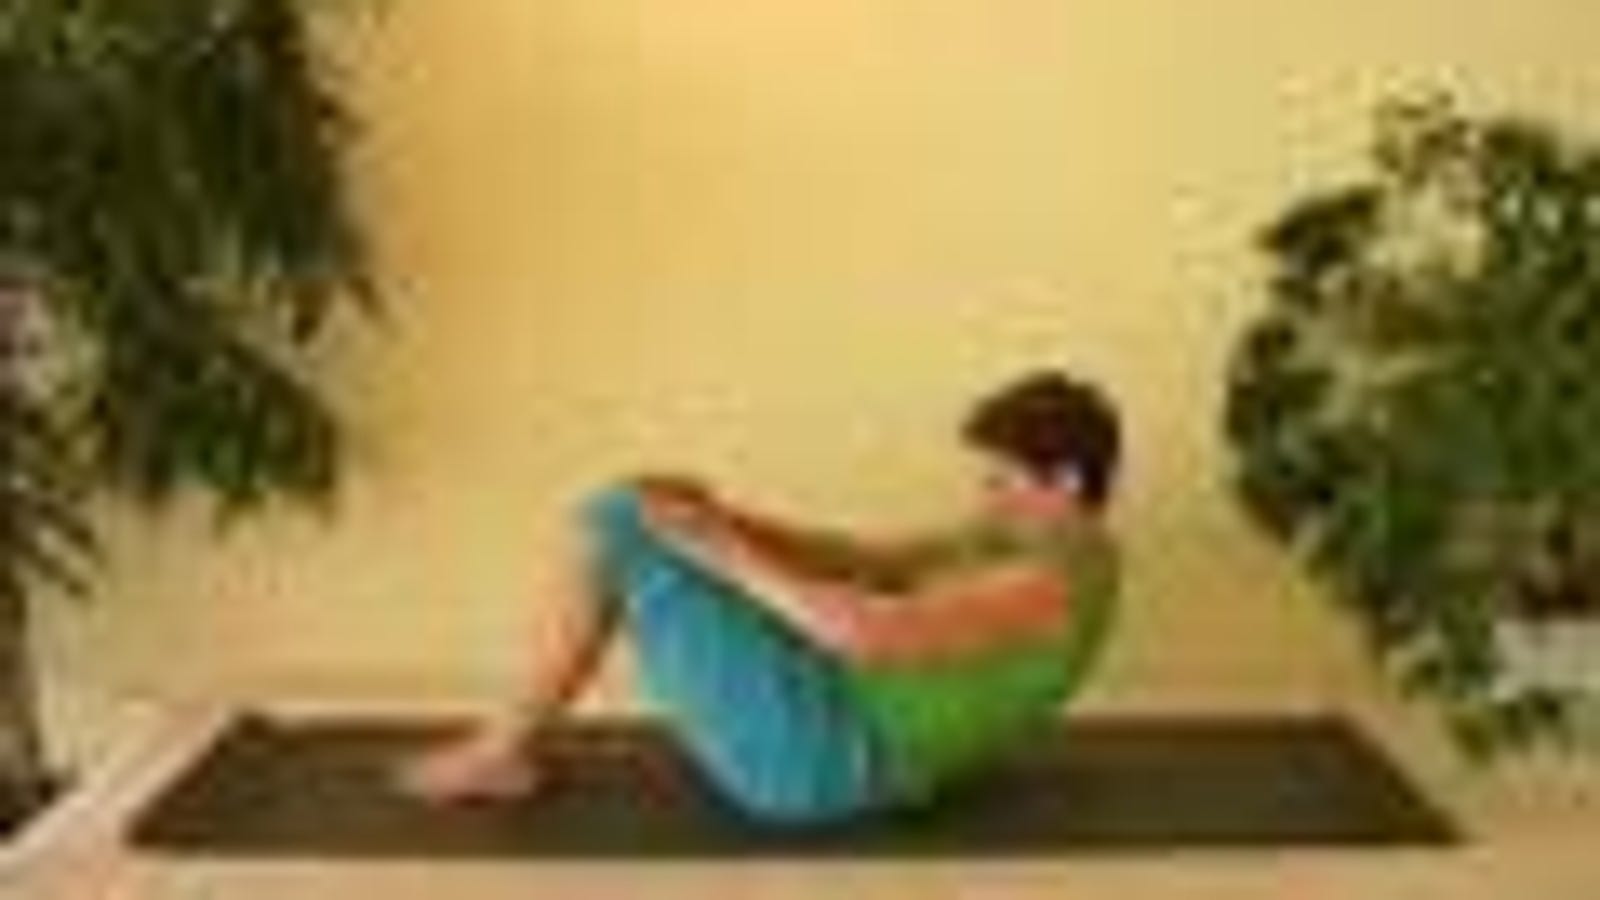 Get Better Sleep And Improve Digestion With This 30 Second Yoga Move 2204